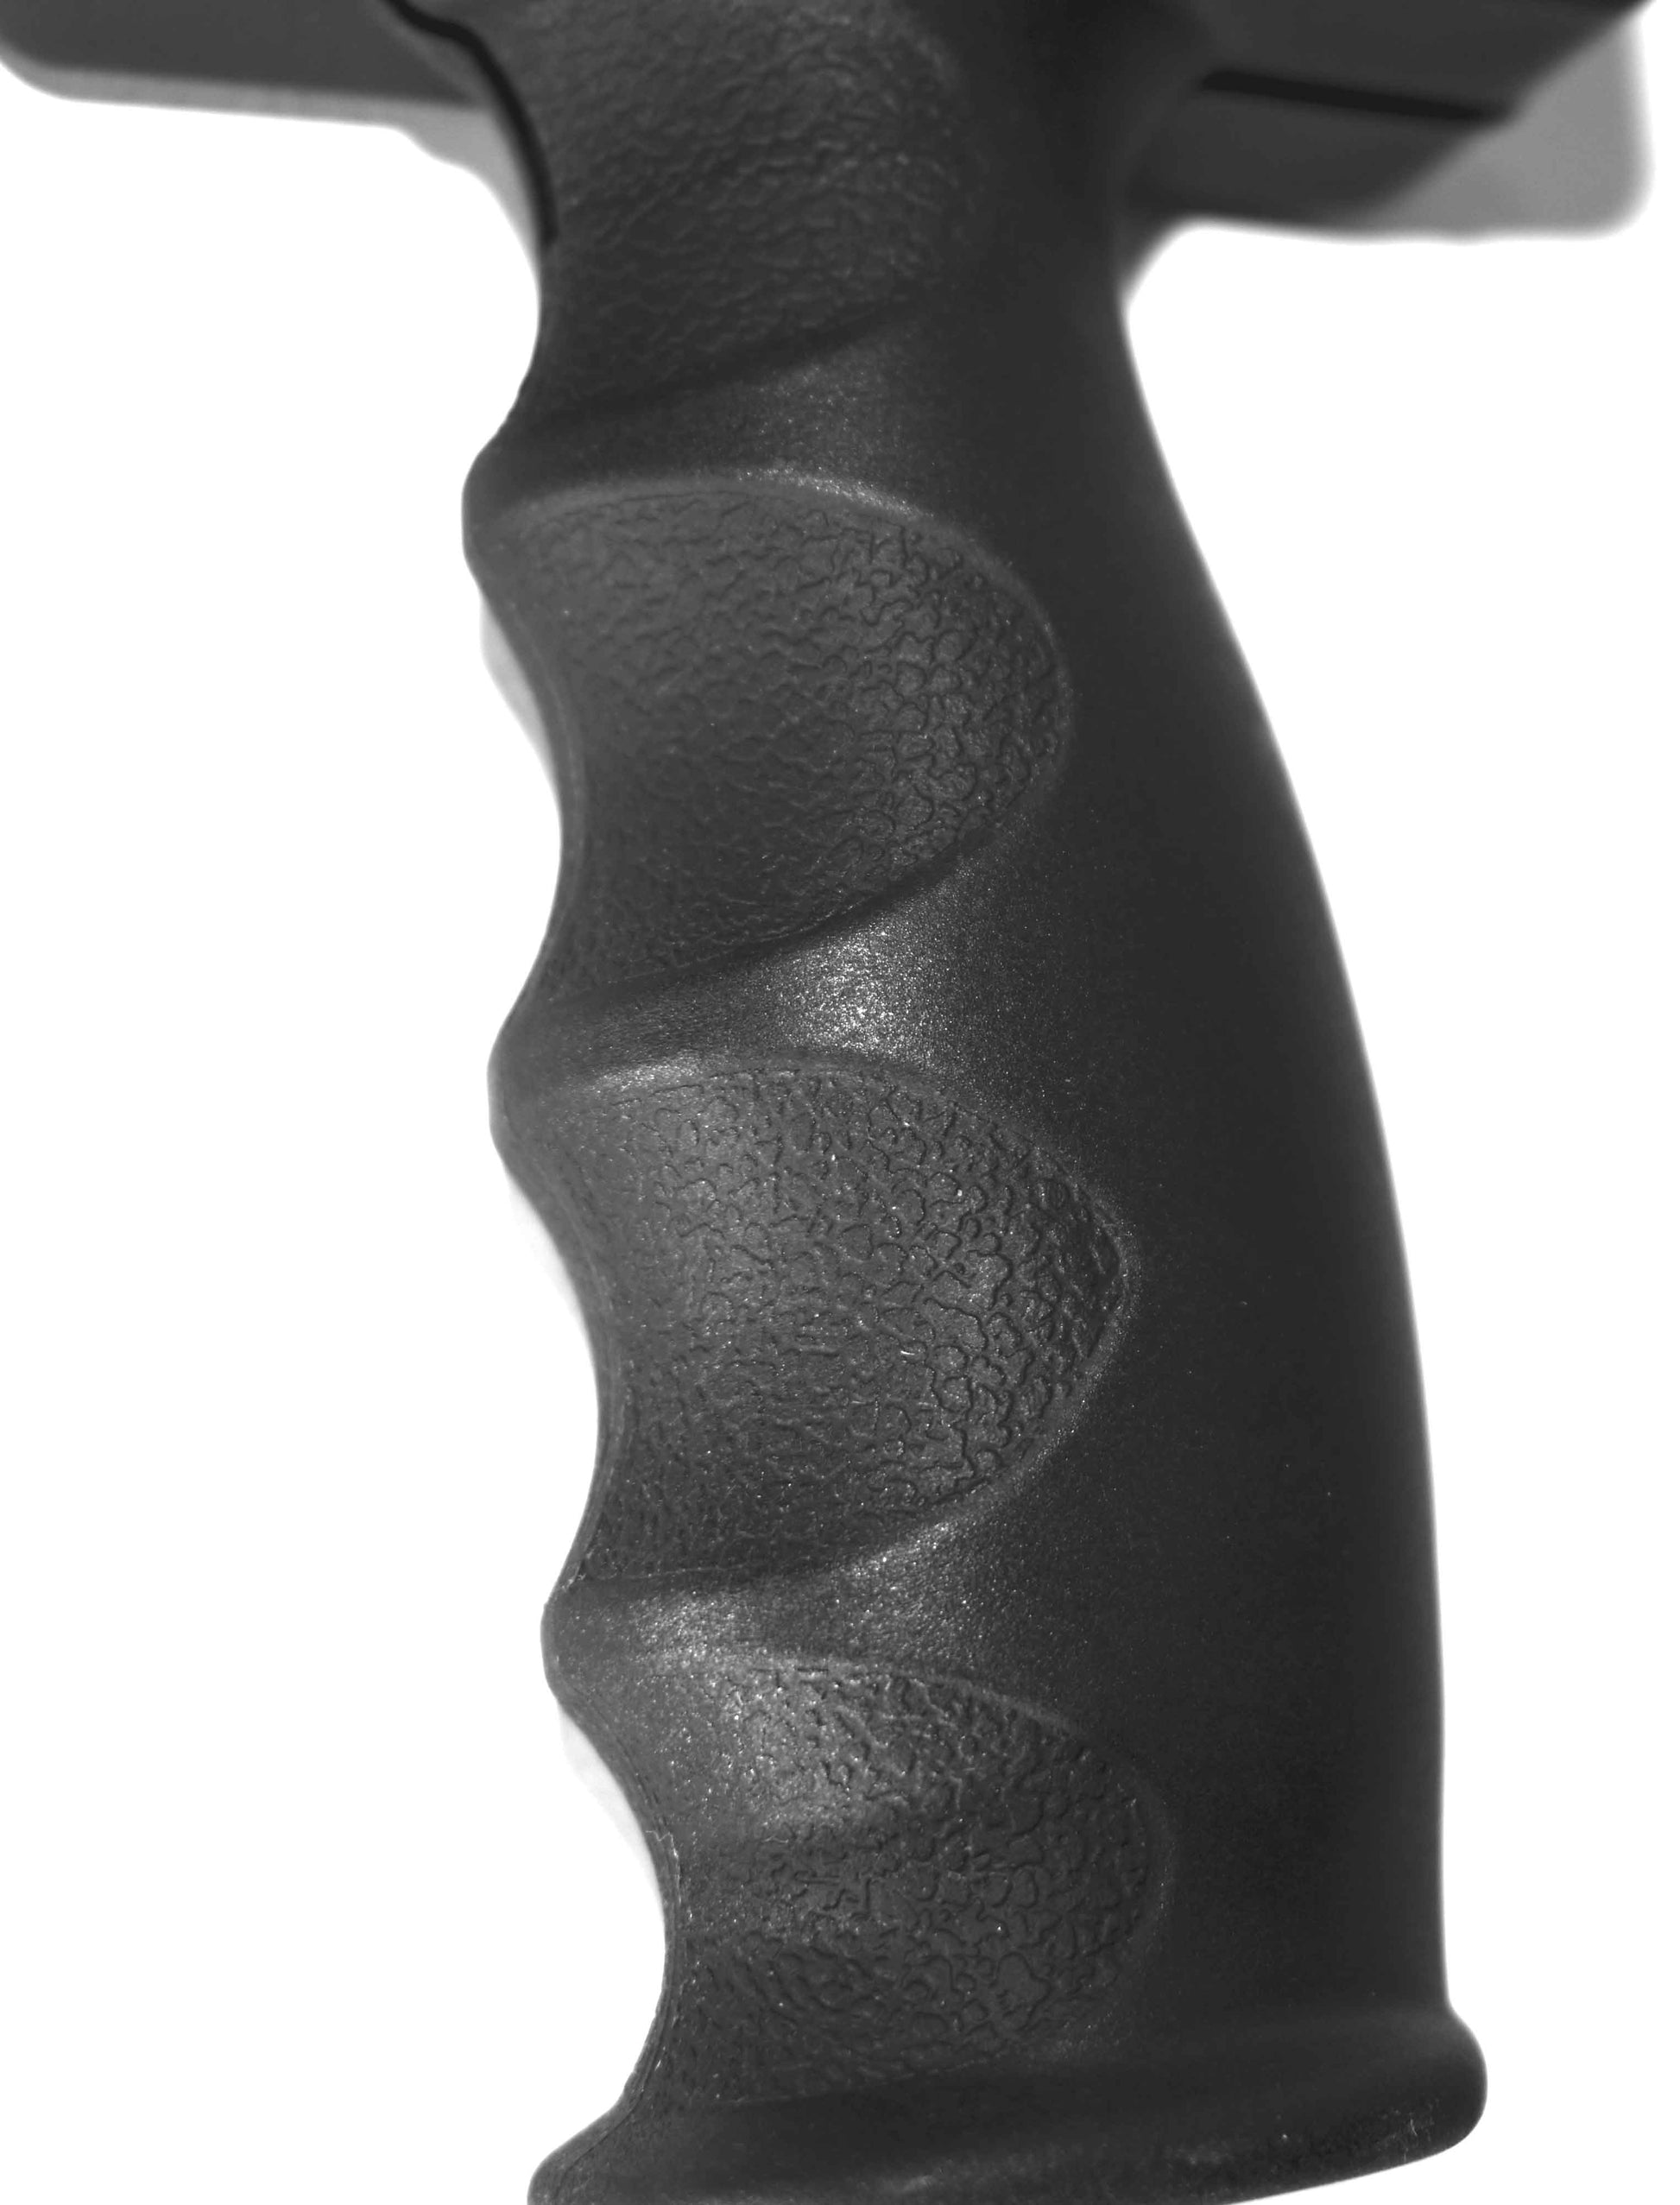 picatinny style grip black for rifles.